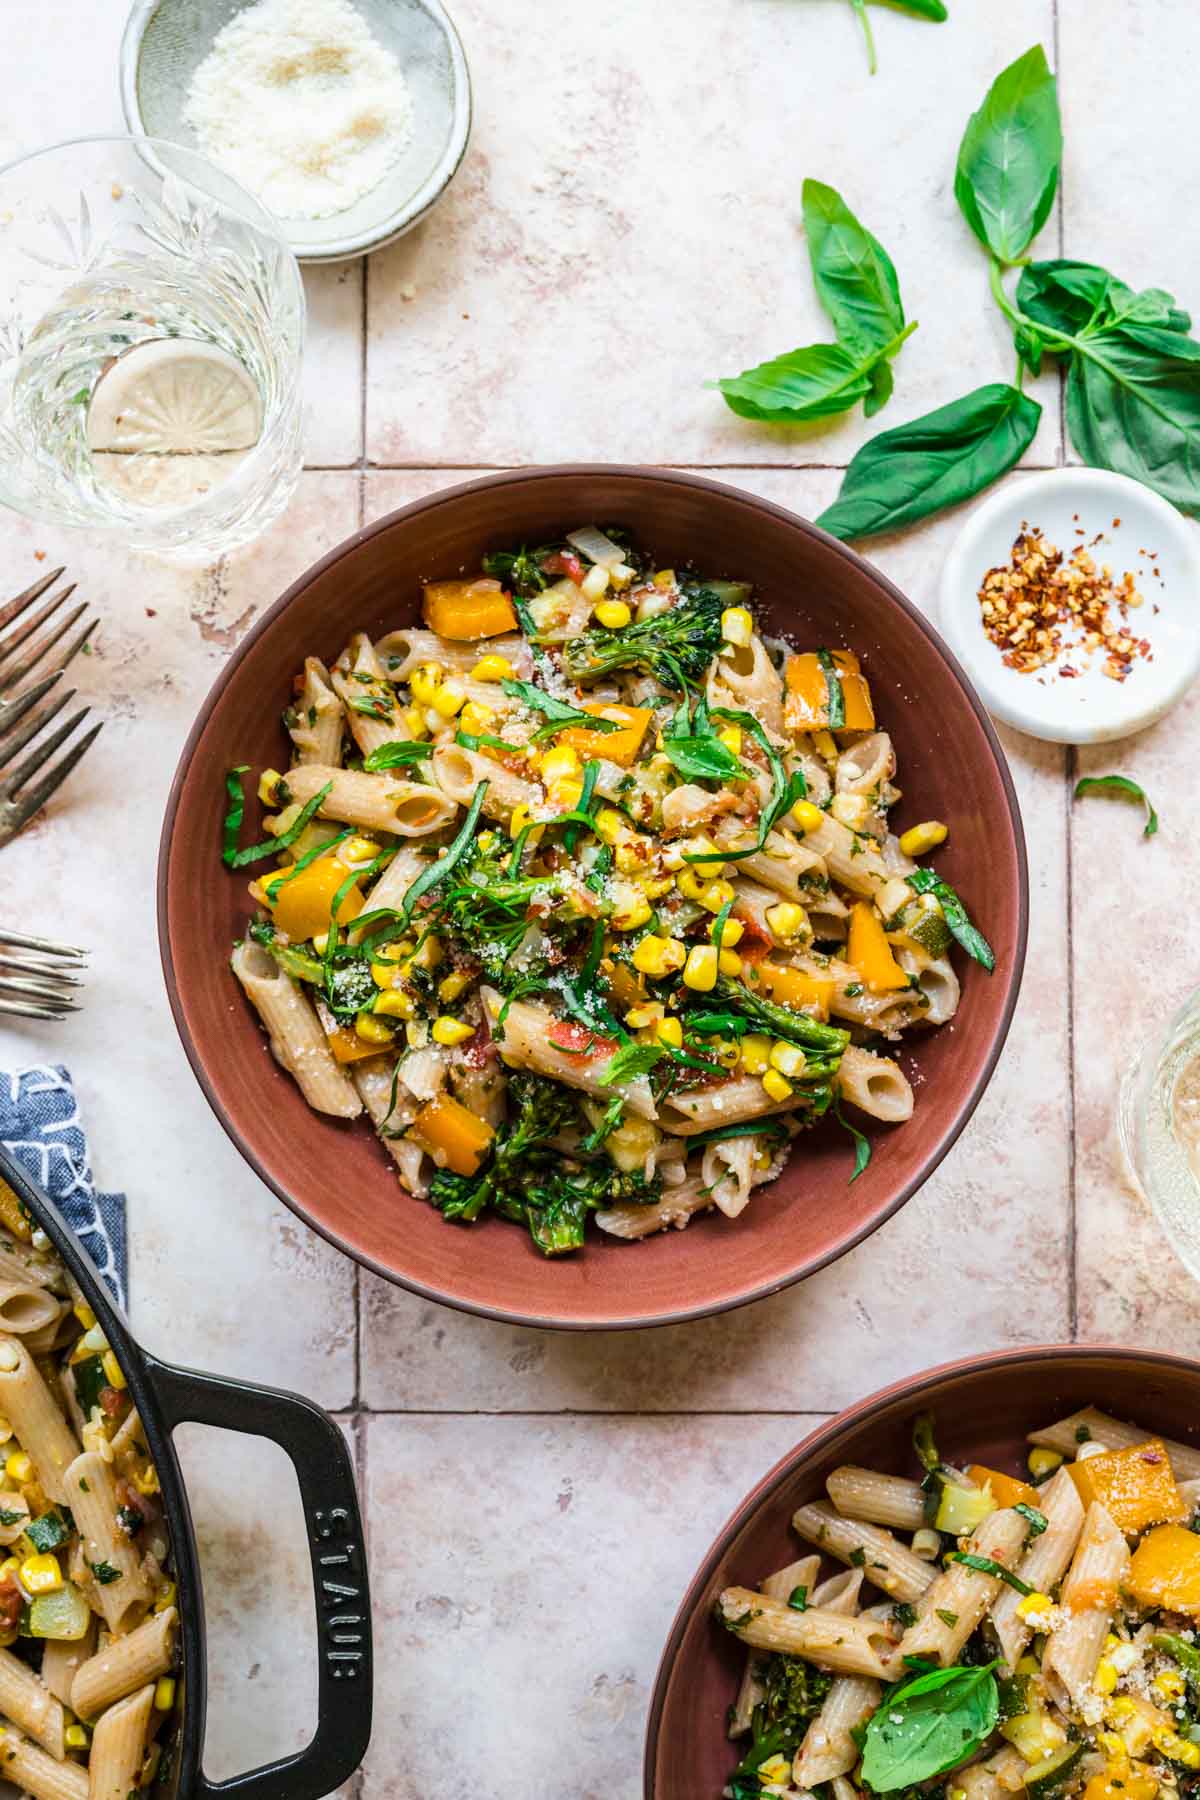 This vegan pasta recipe is packed with our favorite summer vegetables like zucchini and corn. Best of all, this recipe comes together with just one pot and one pan.